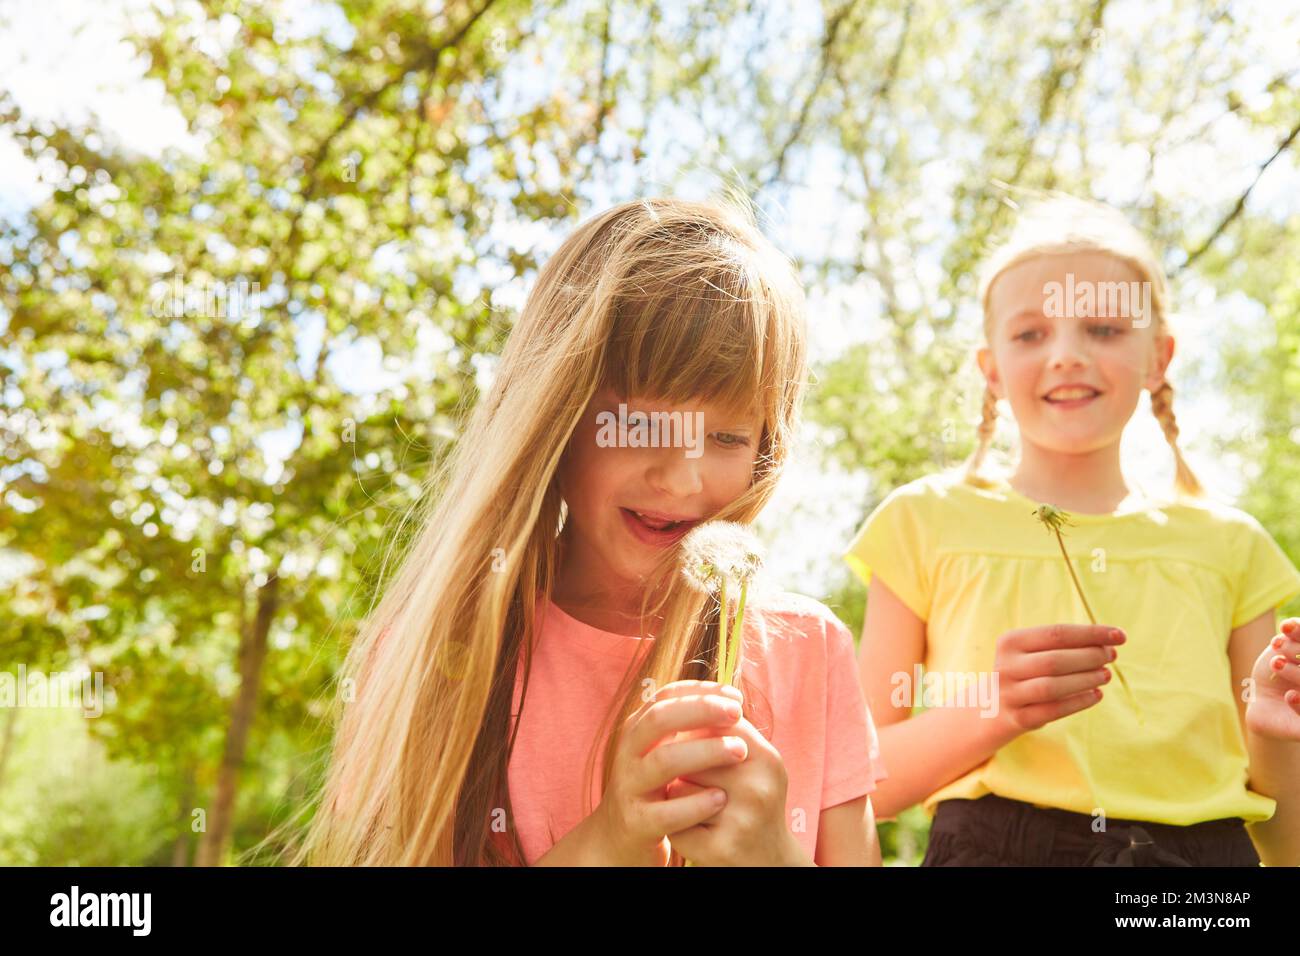 Smiling elementary girl blowing dandelion by friend in park during summer vacation Stock Photo